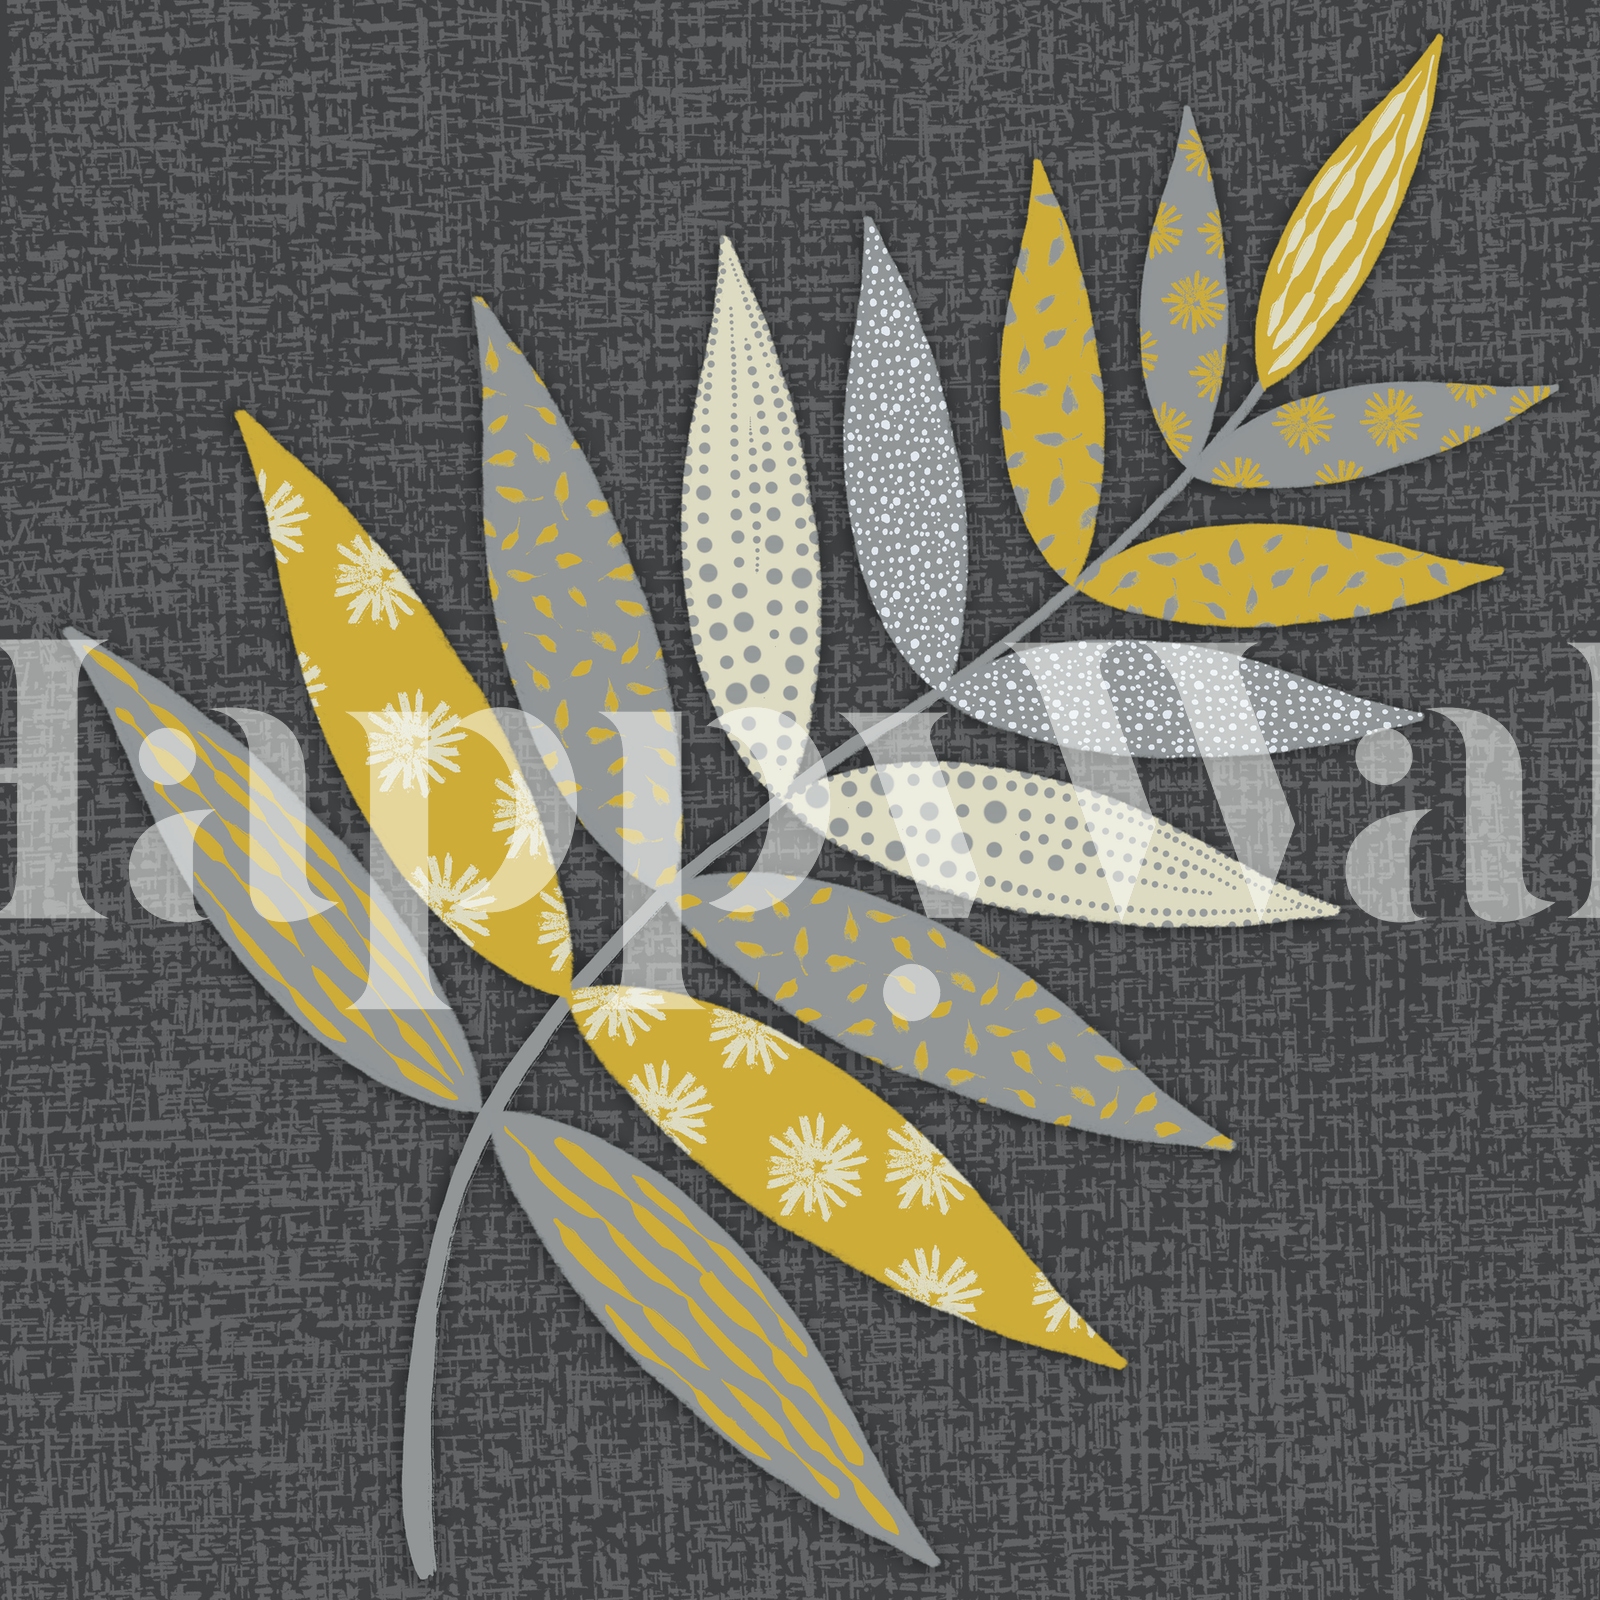 Buy Patterned leaf on grey wallpaper - Free shipping